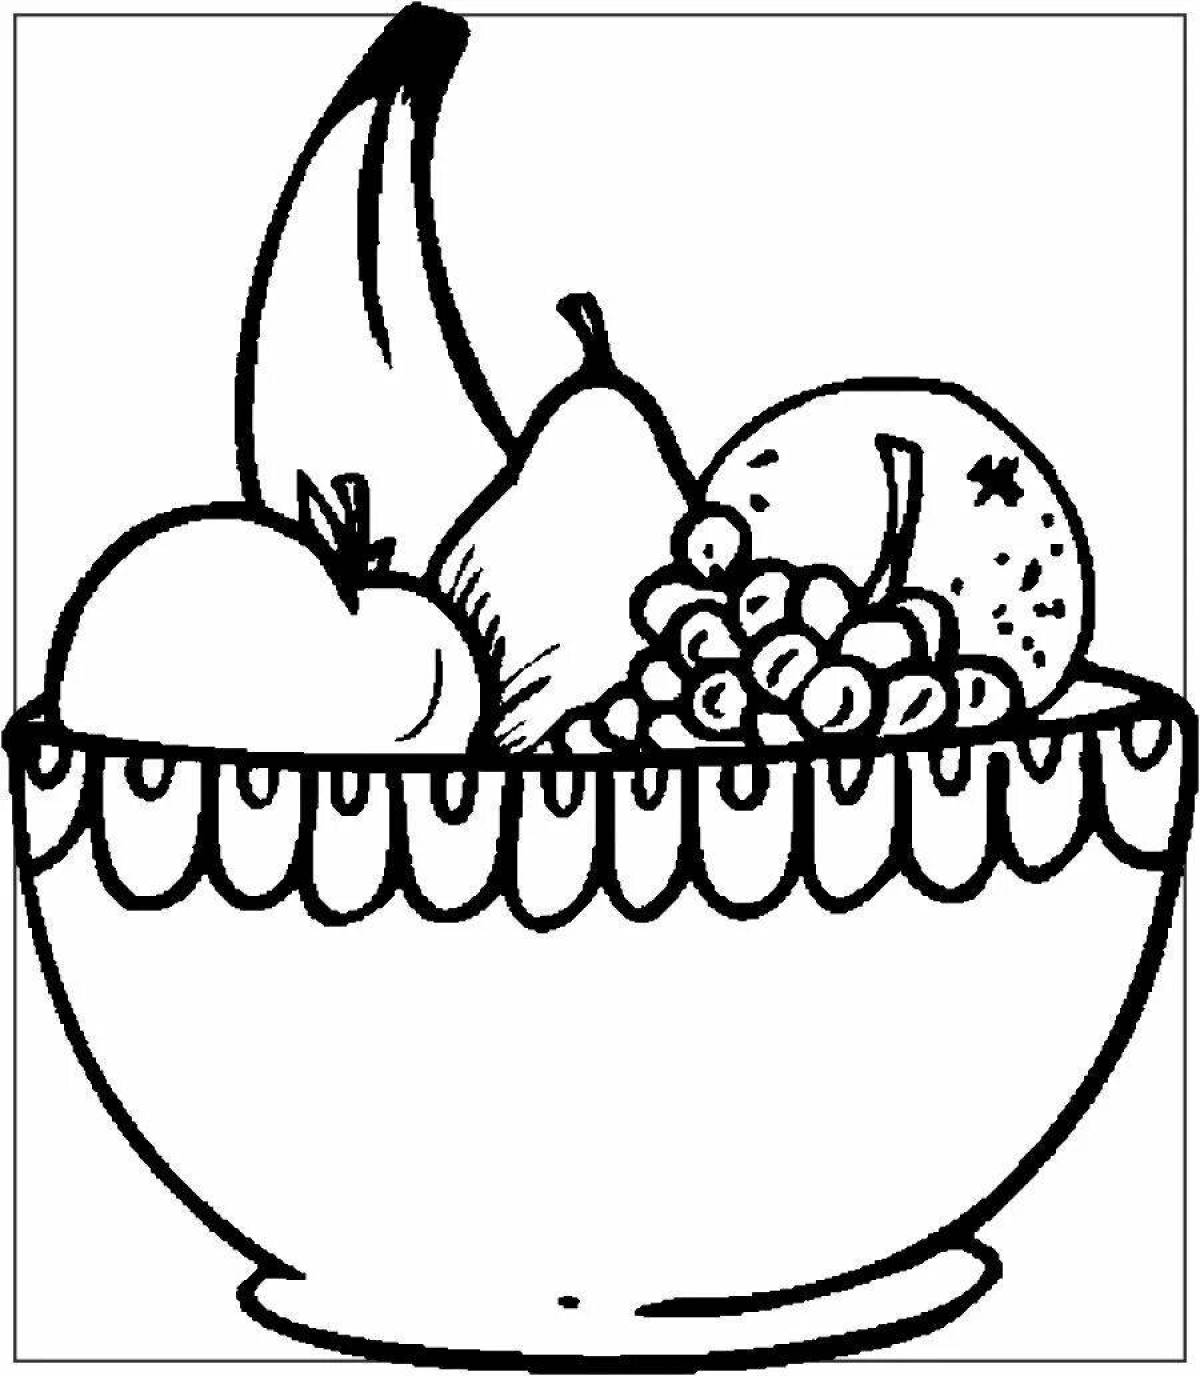 Stimulating fruit plate coloring book for kids